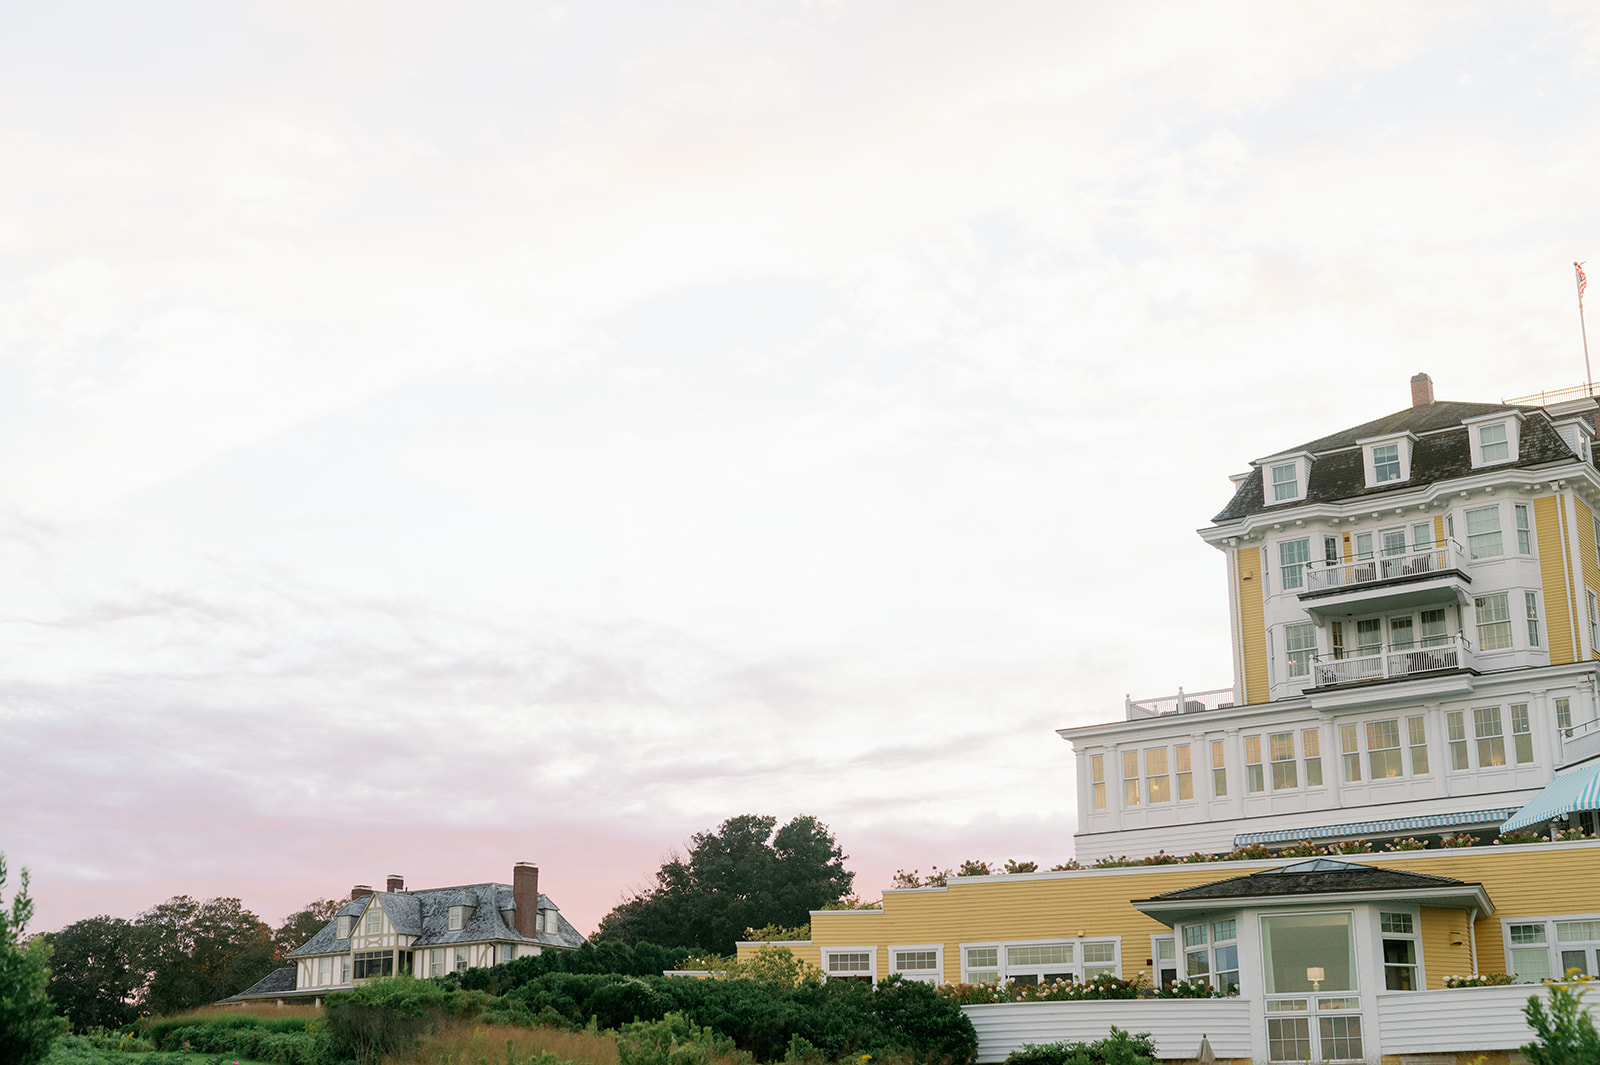 The beautiful Ocean House hotel in Rhode Island at sunset. 